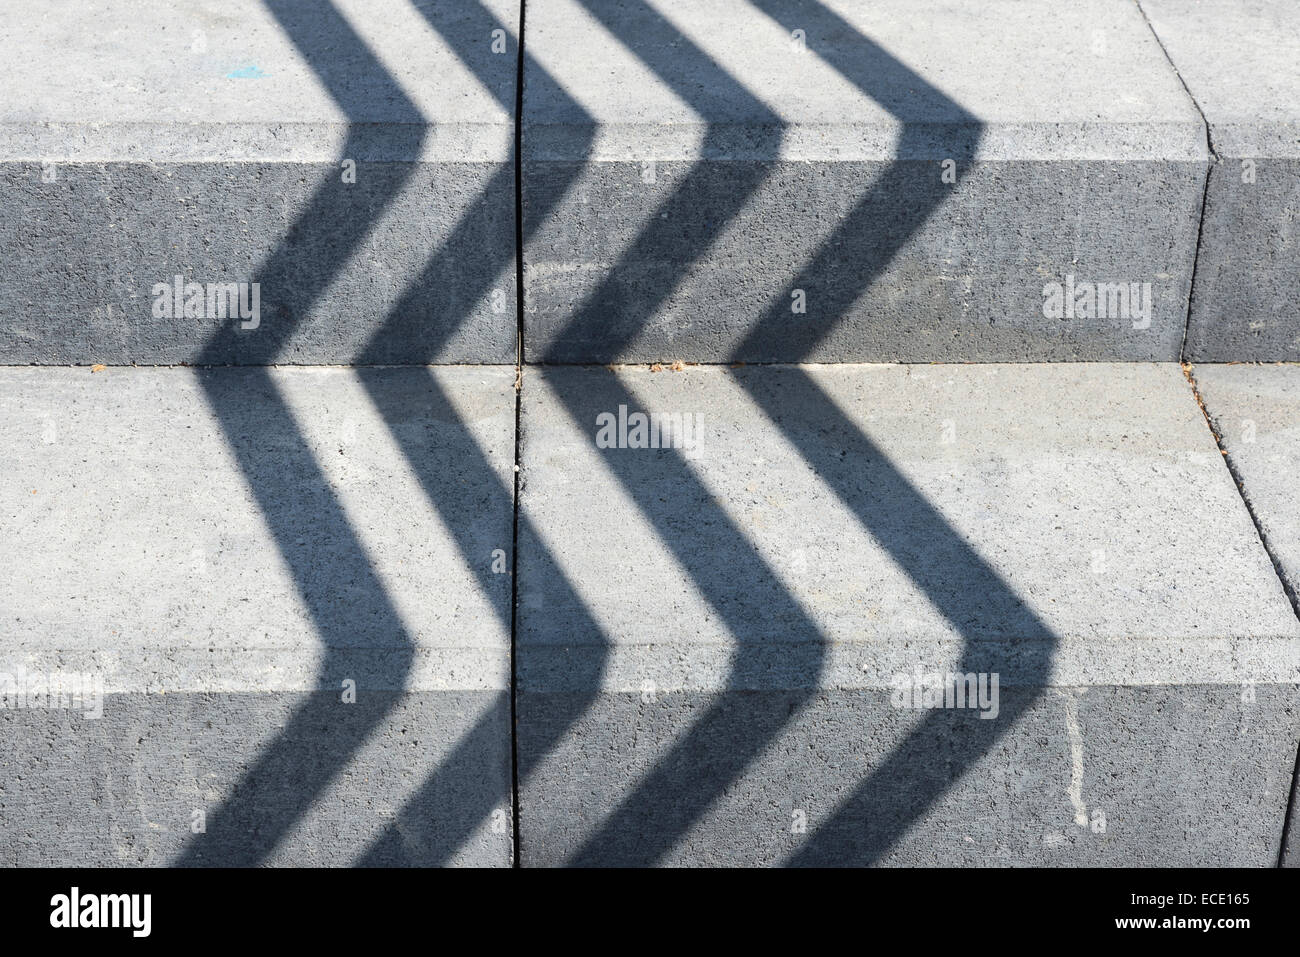 Shadows in straight lines on a gray stone staircase Stock Photo